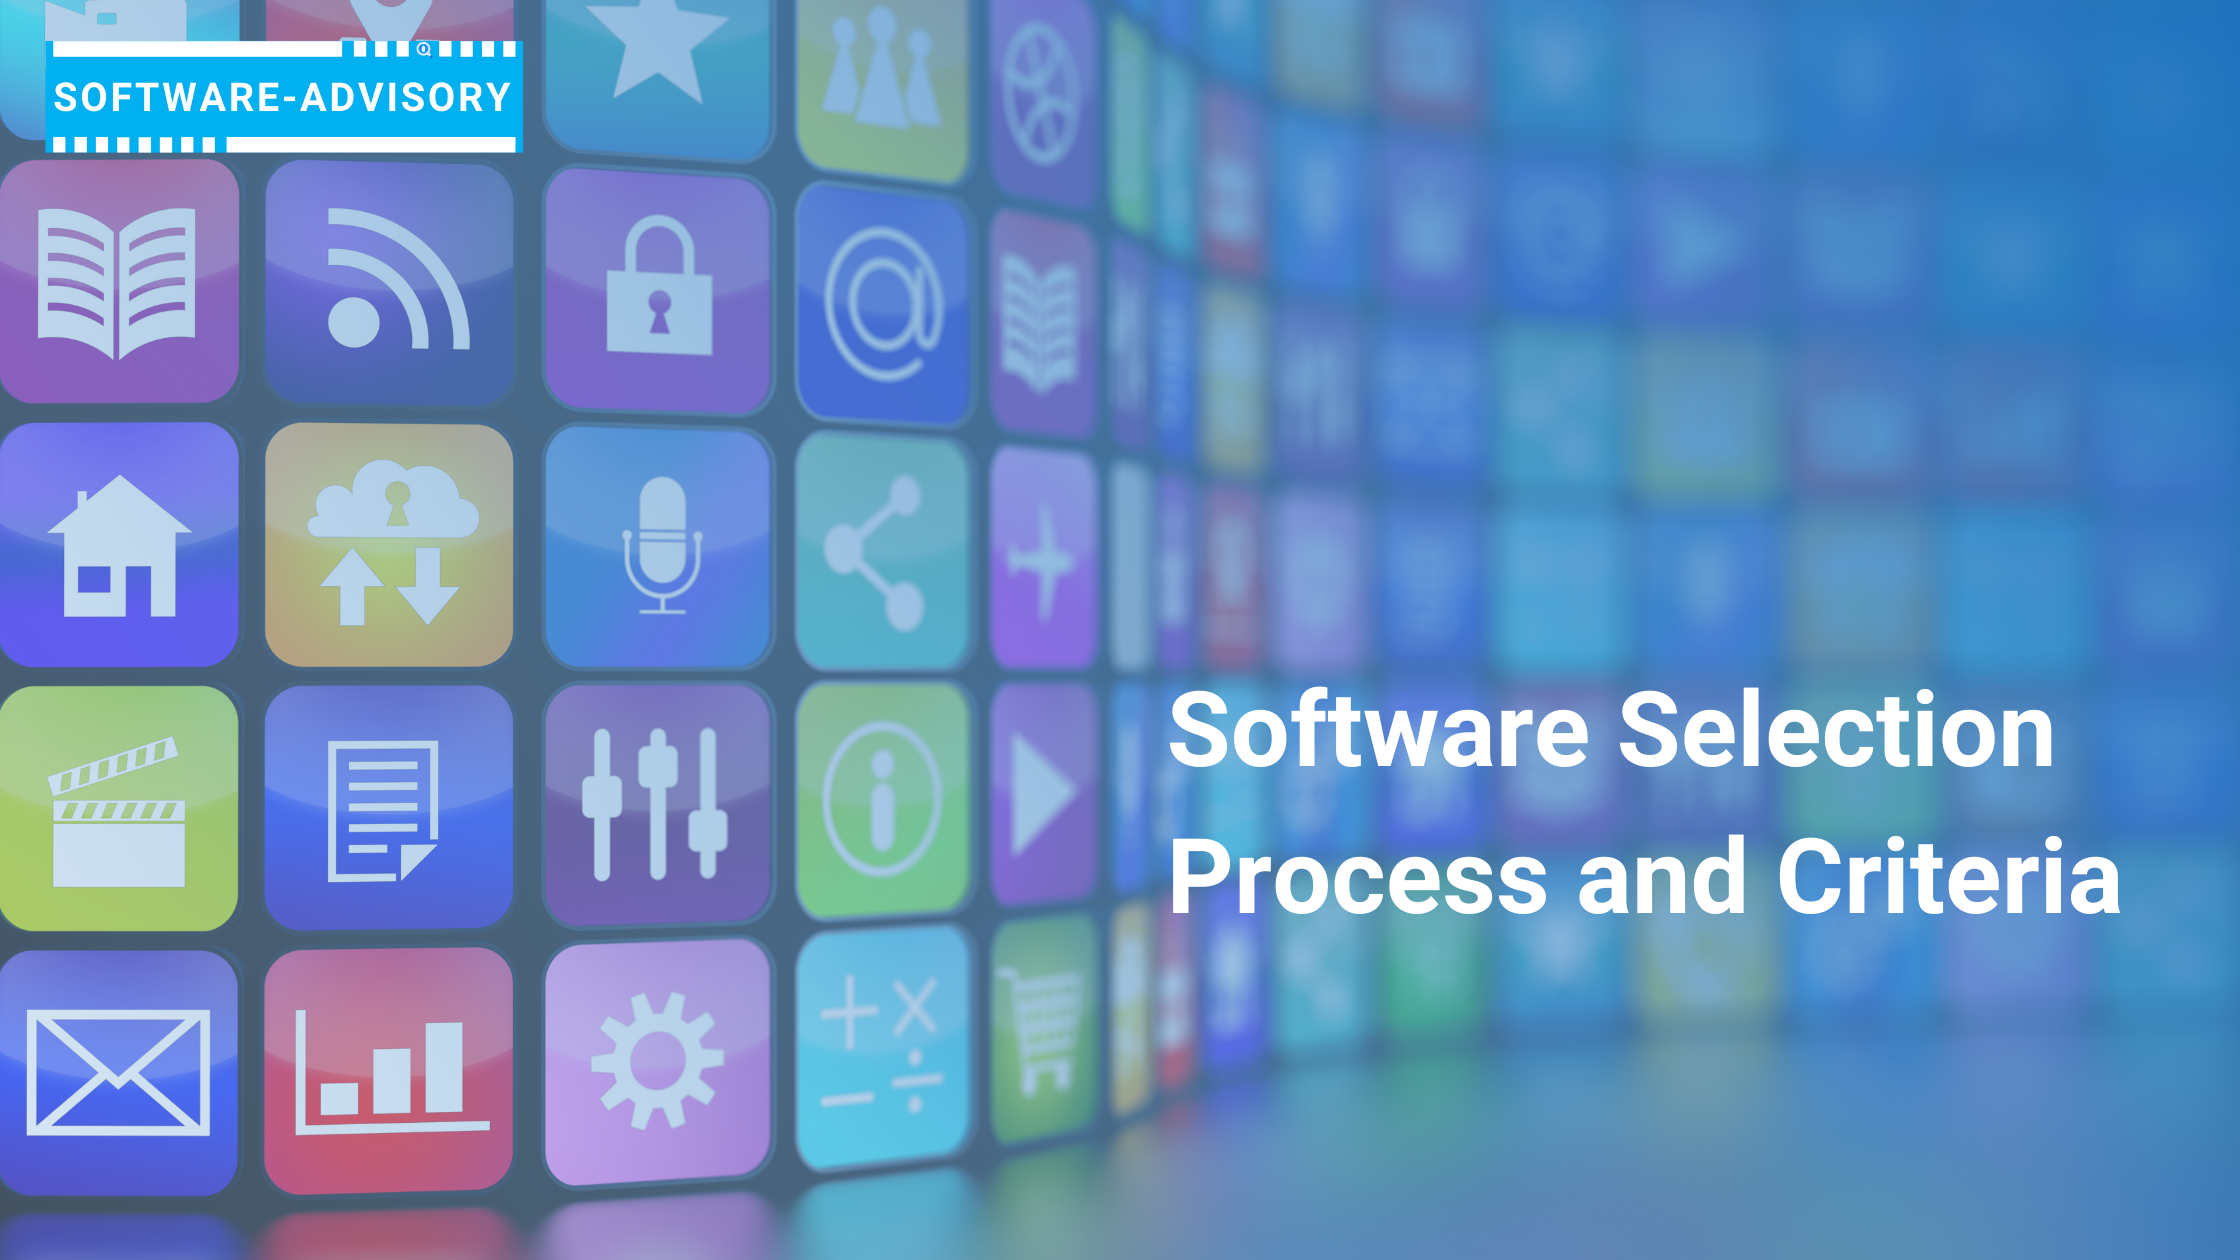 Select a software that best fits your specific needs and requirements
Ensure compatibility with your operating system